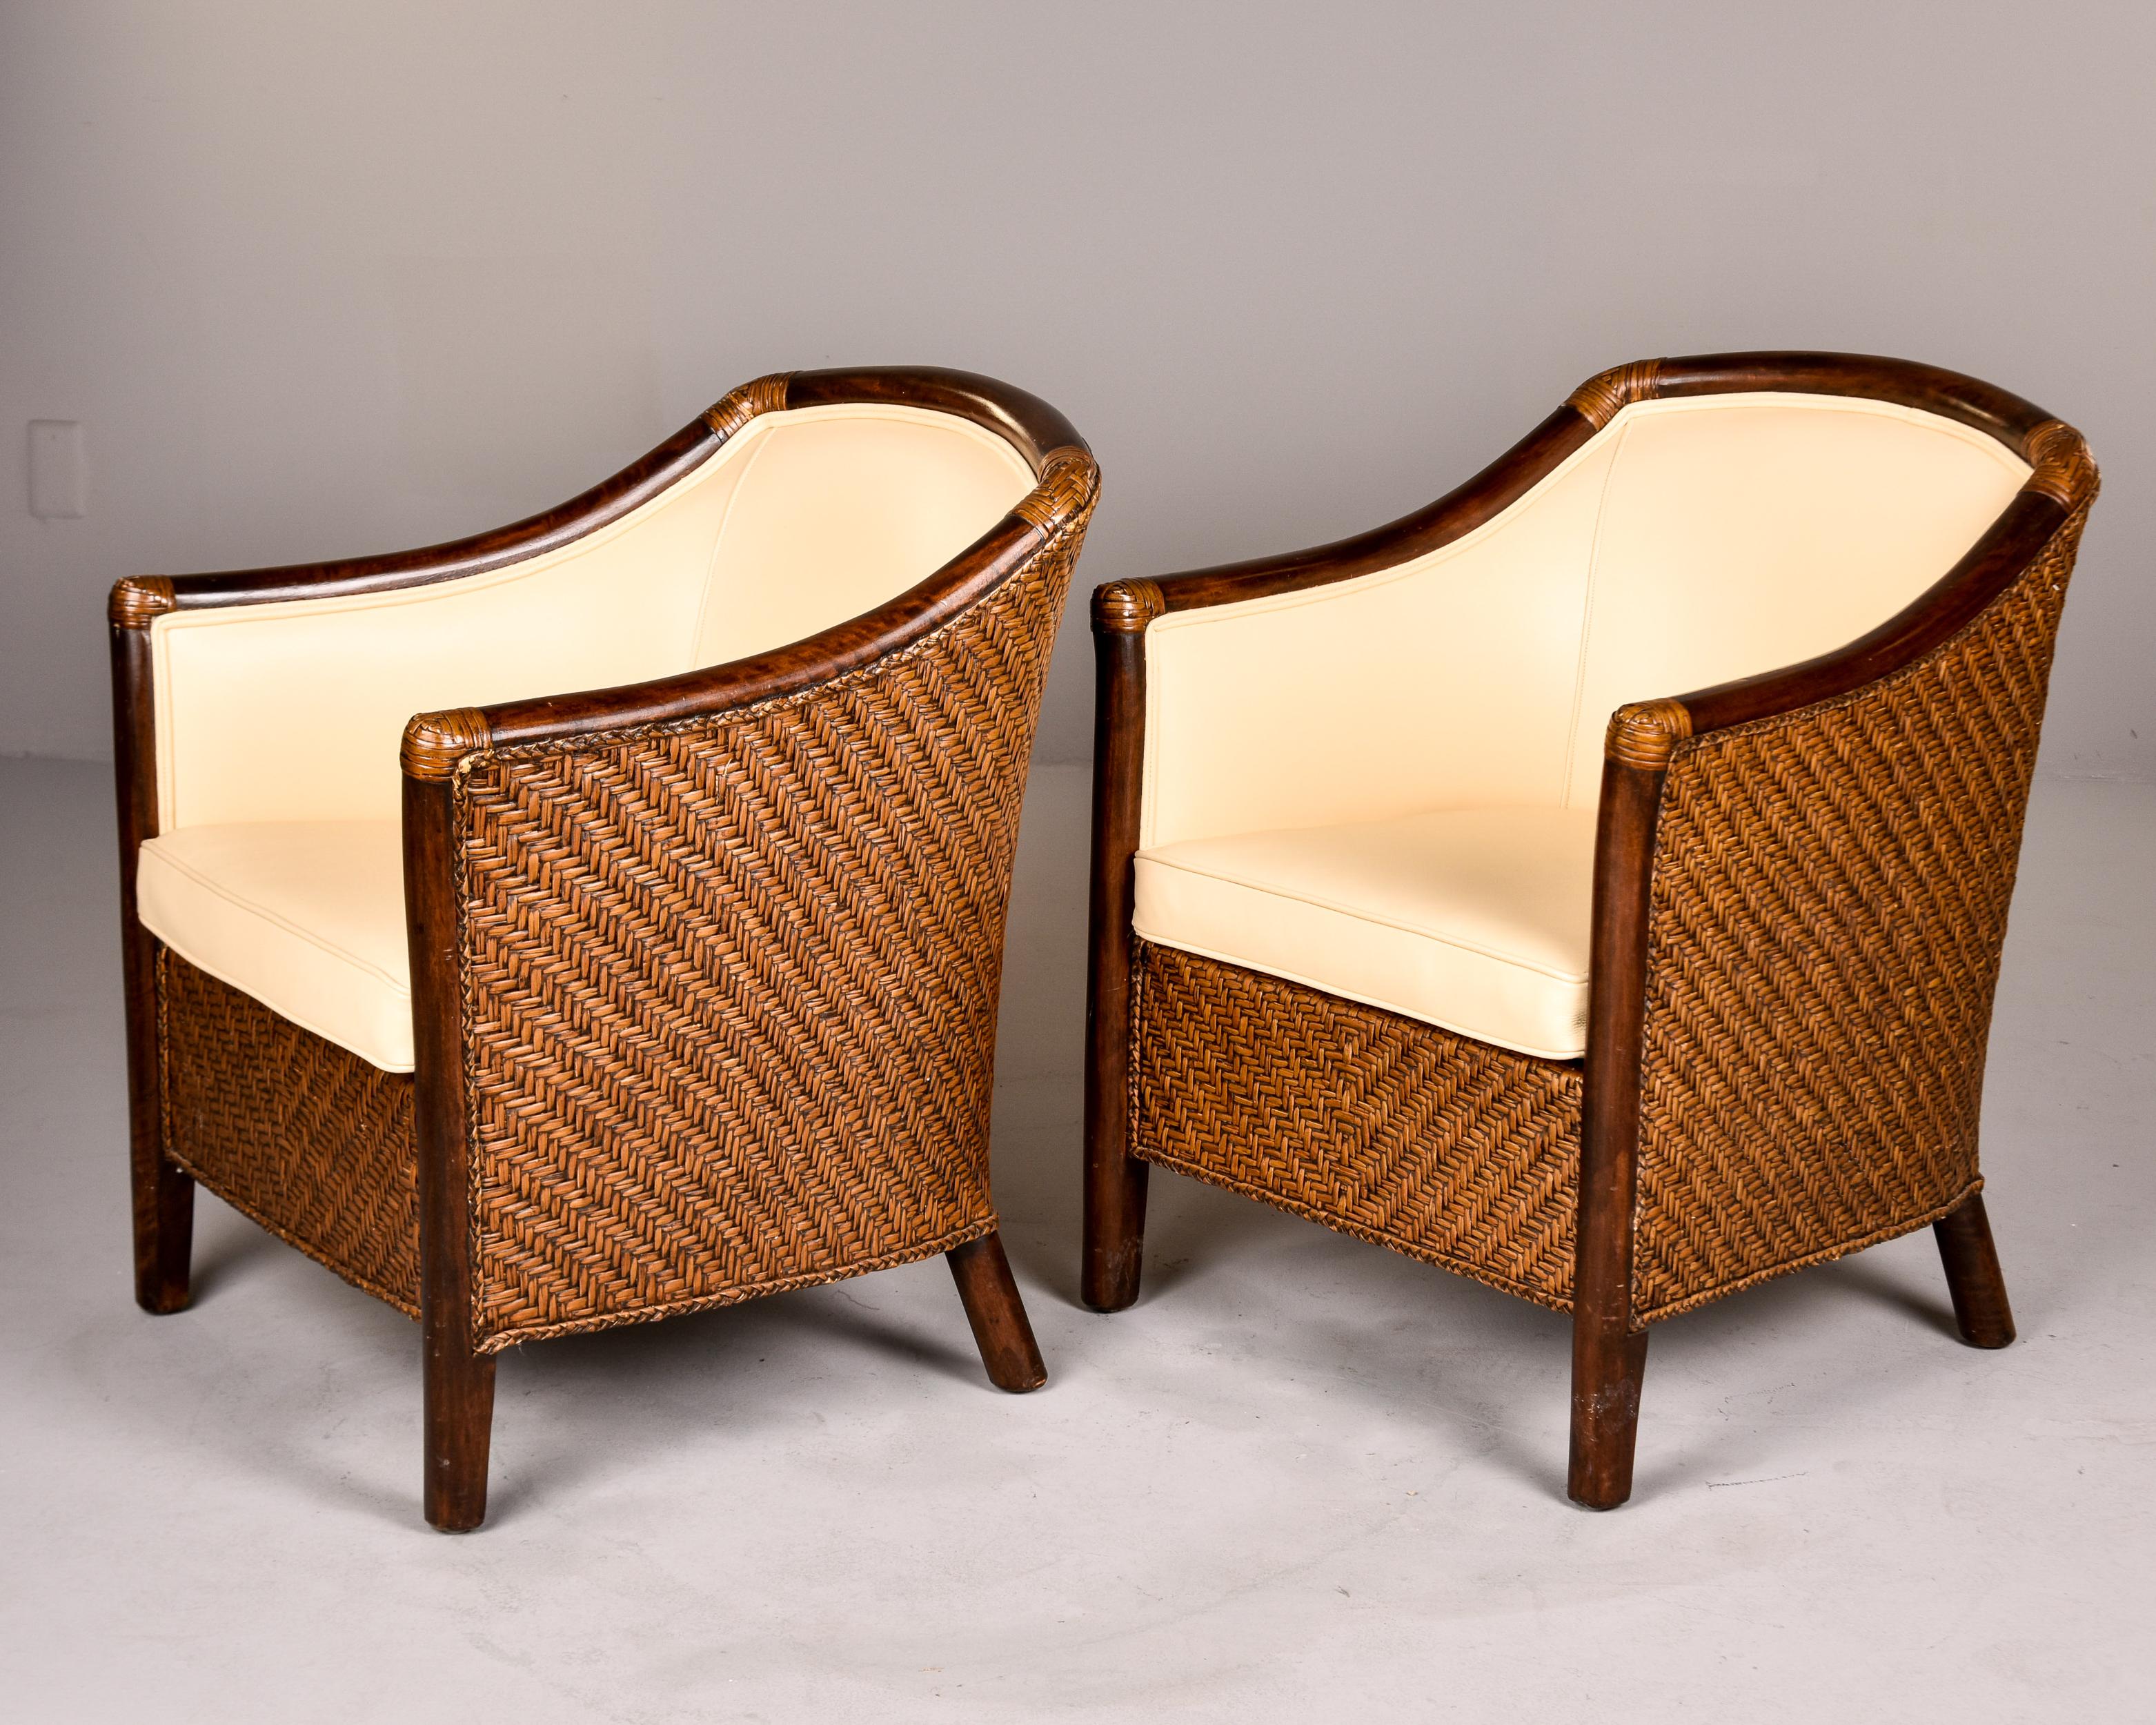 Pair Art Deco Wicker Club Chairs with New Leather Upholstery In Good Condition For Sale In Troy, MI